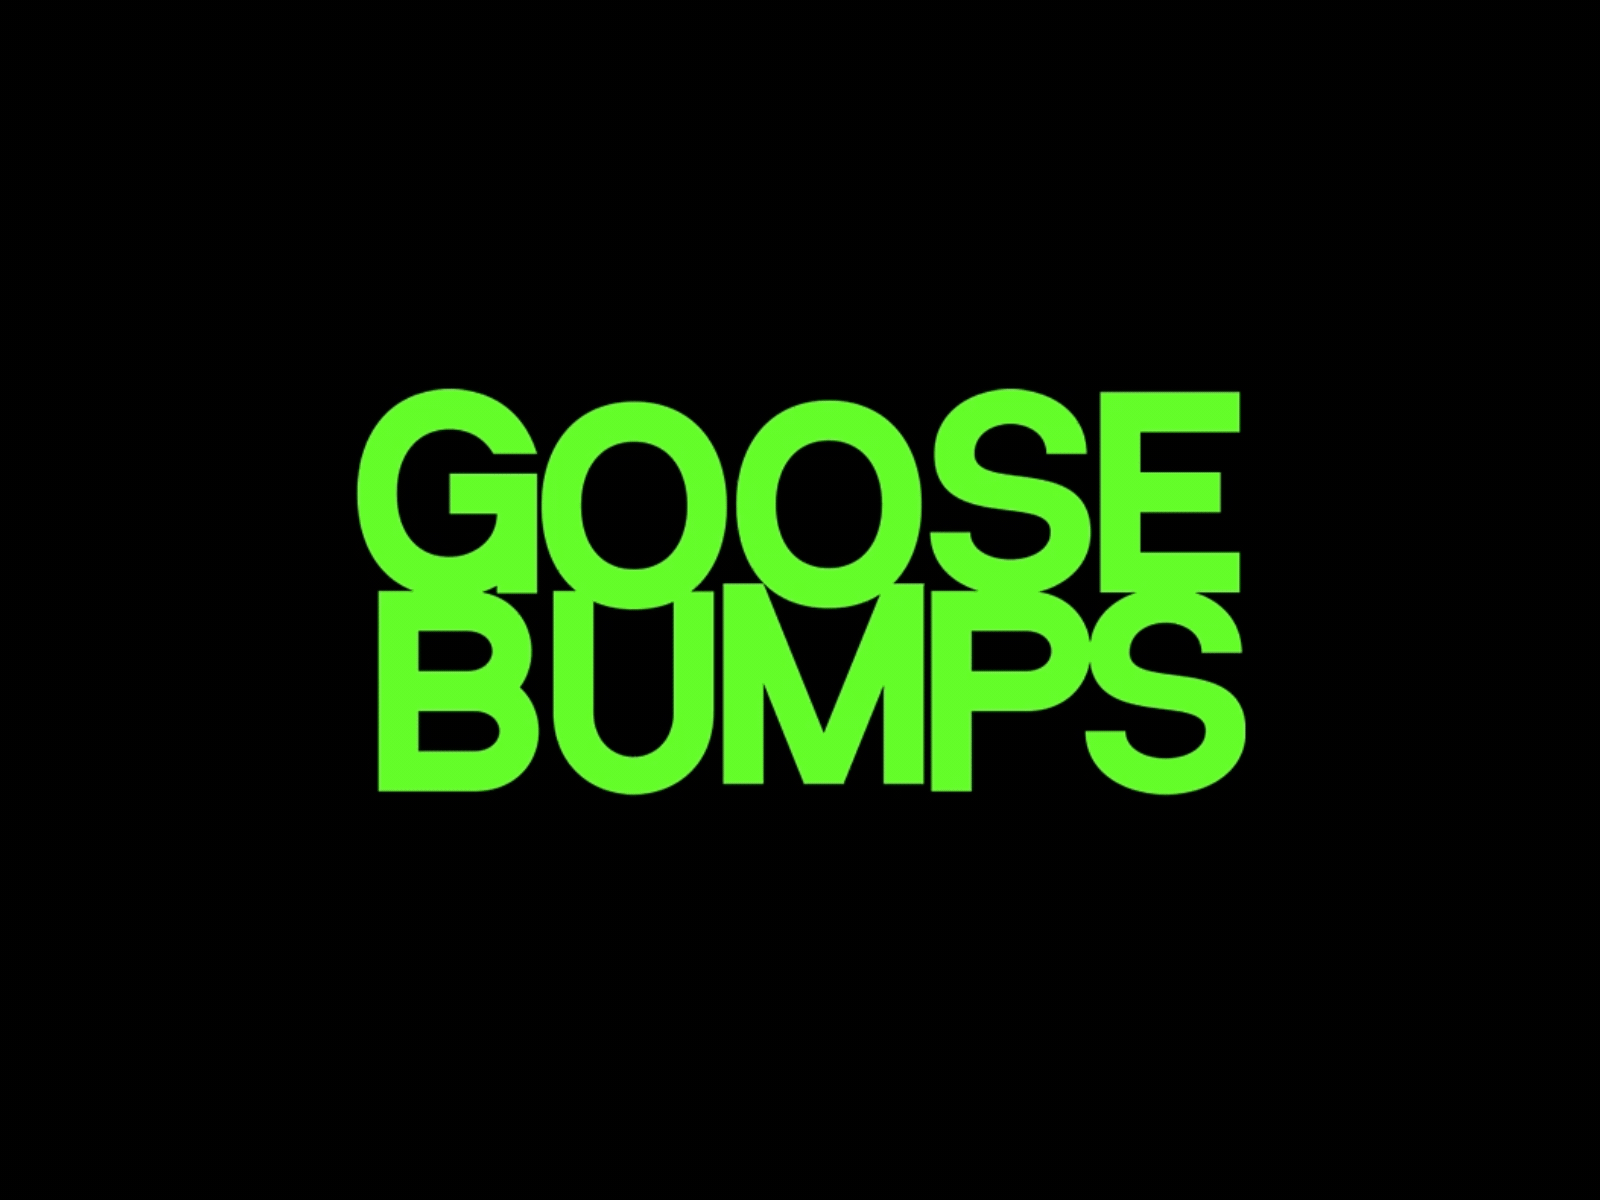 GOOSEBUMPS aftereffects celanimation design framebyframe gif goosebumps halloween illustration kinetictype kinetictypography loop motion motion design motion graphics photoshop scary type typeinmotion typography vector